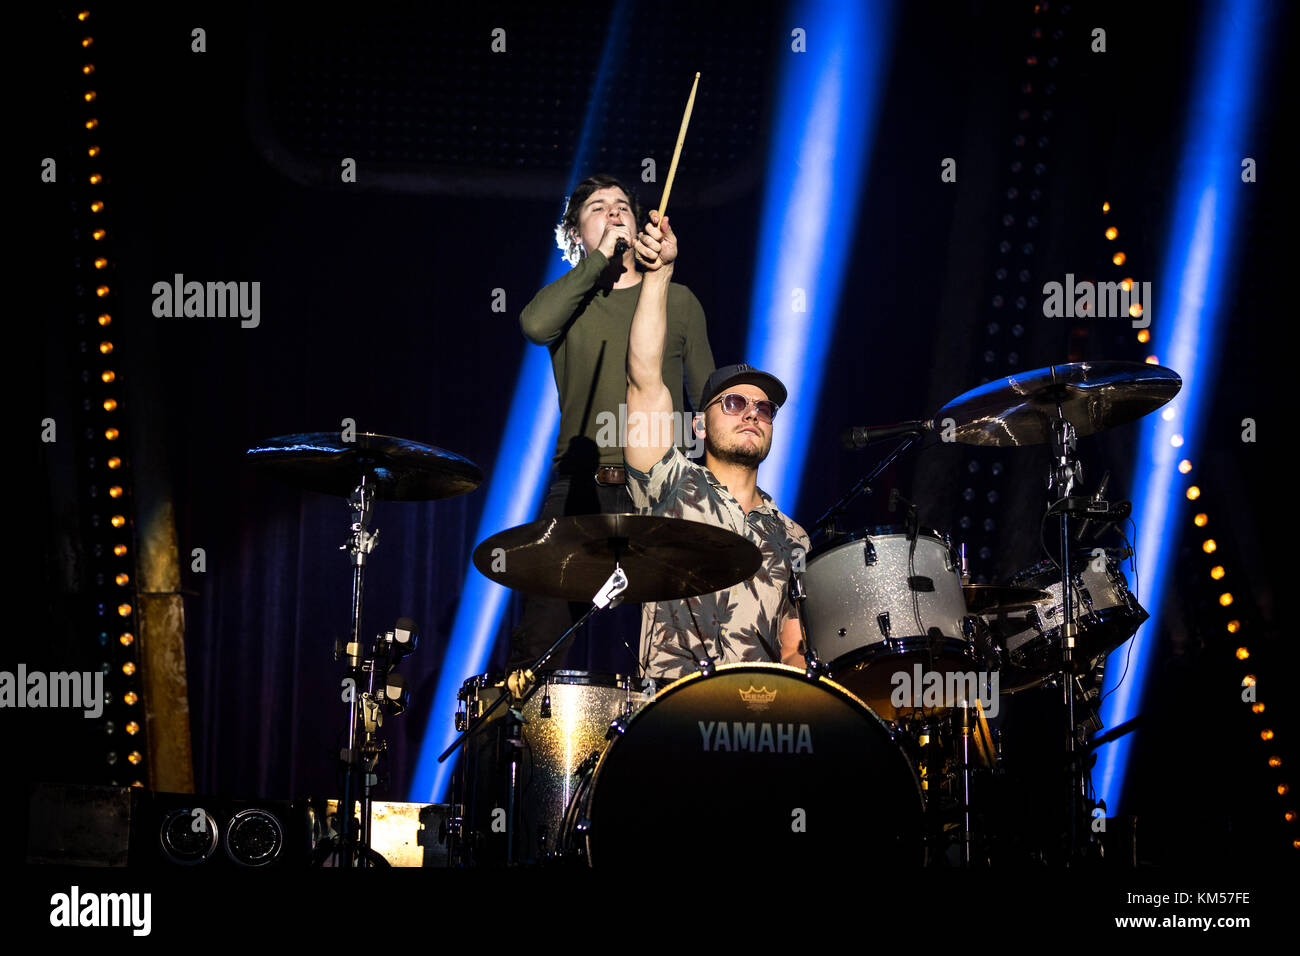 The Danish band Lukas Graham performs a live concert at the Mitsubishi Electric Halle in Düsseldorf. Here singer and songwriter Lukas Forchhammer is seen live on stage with drummer Mark Falgren. Germany, 13/03 2017. Stock Photo